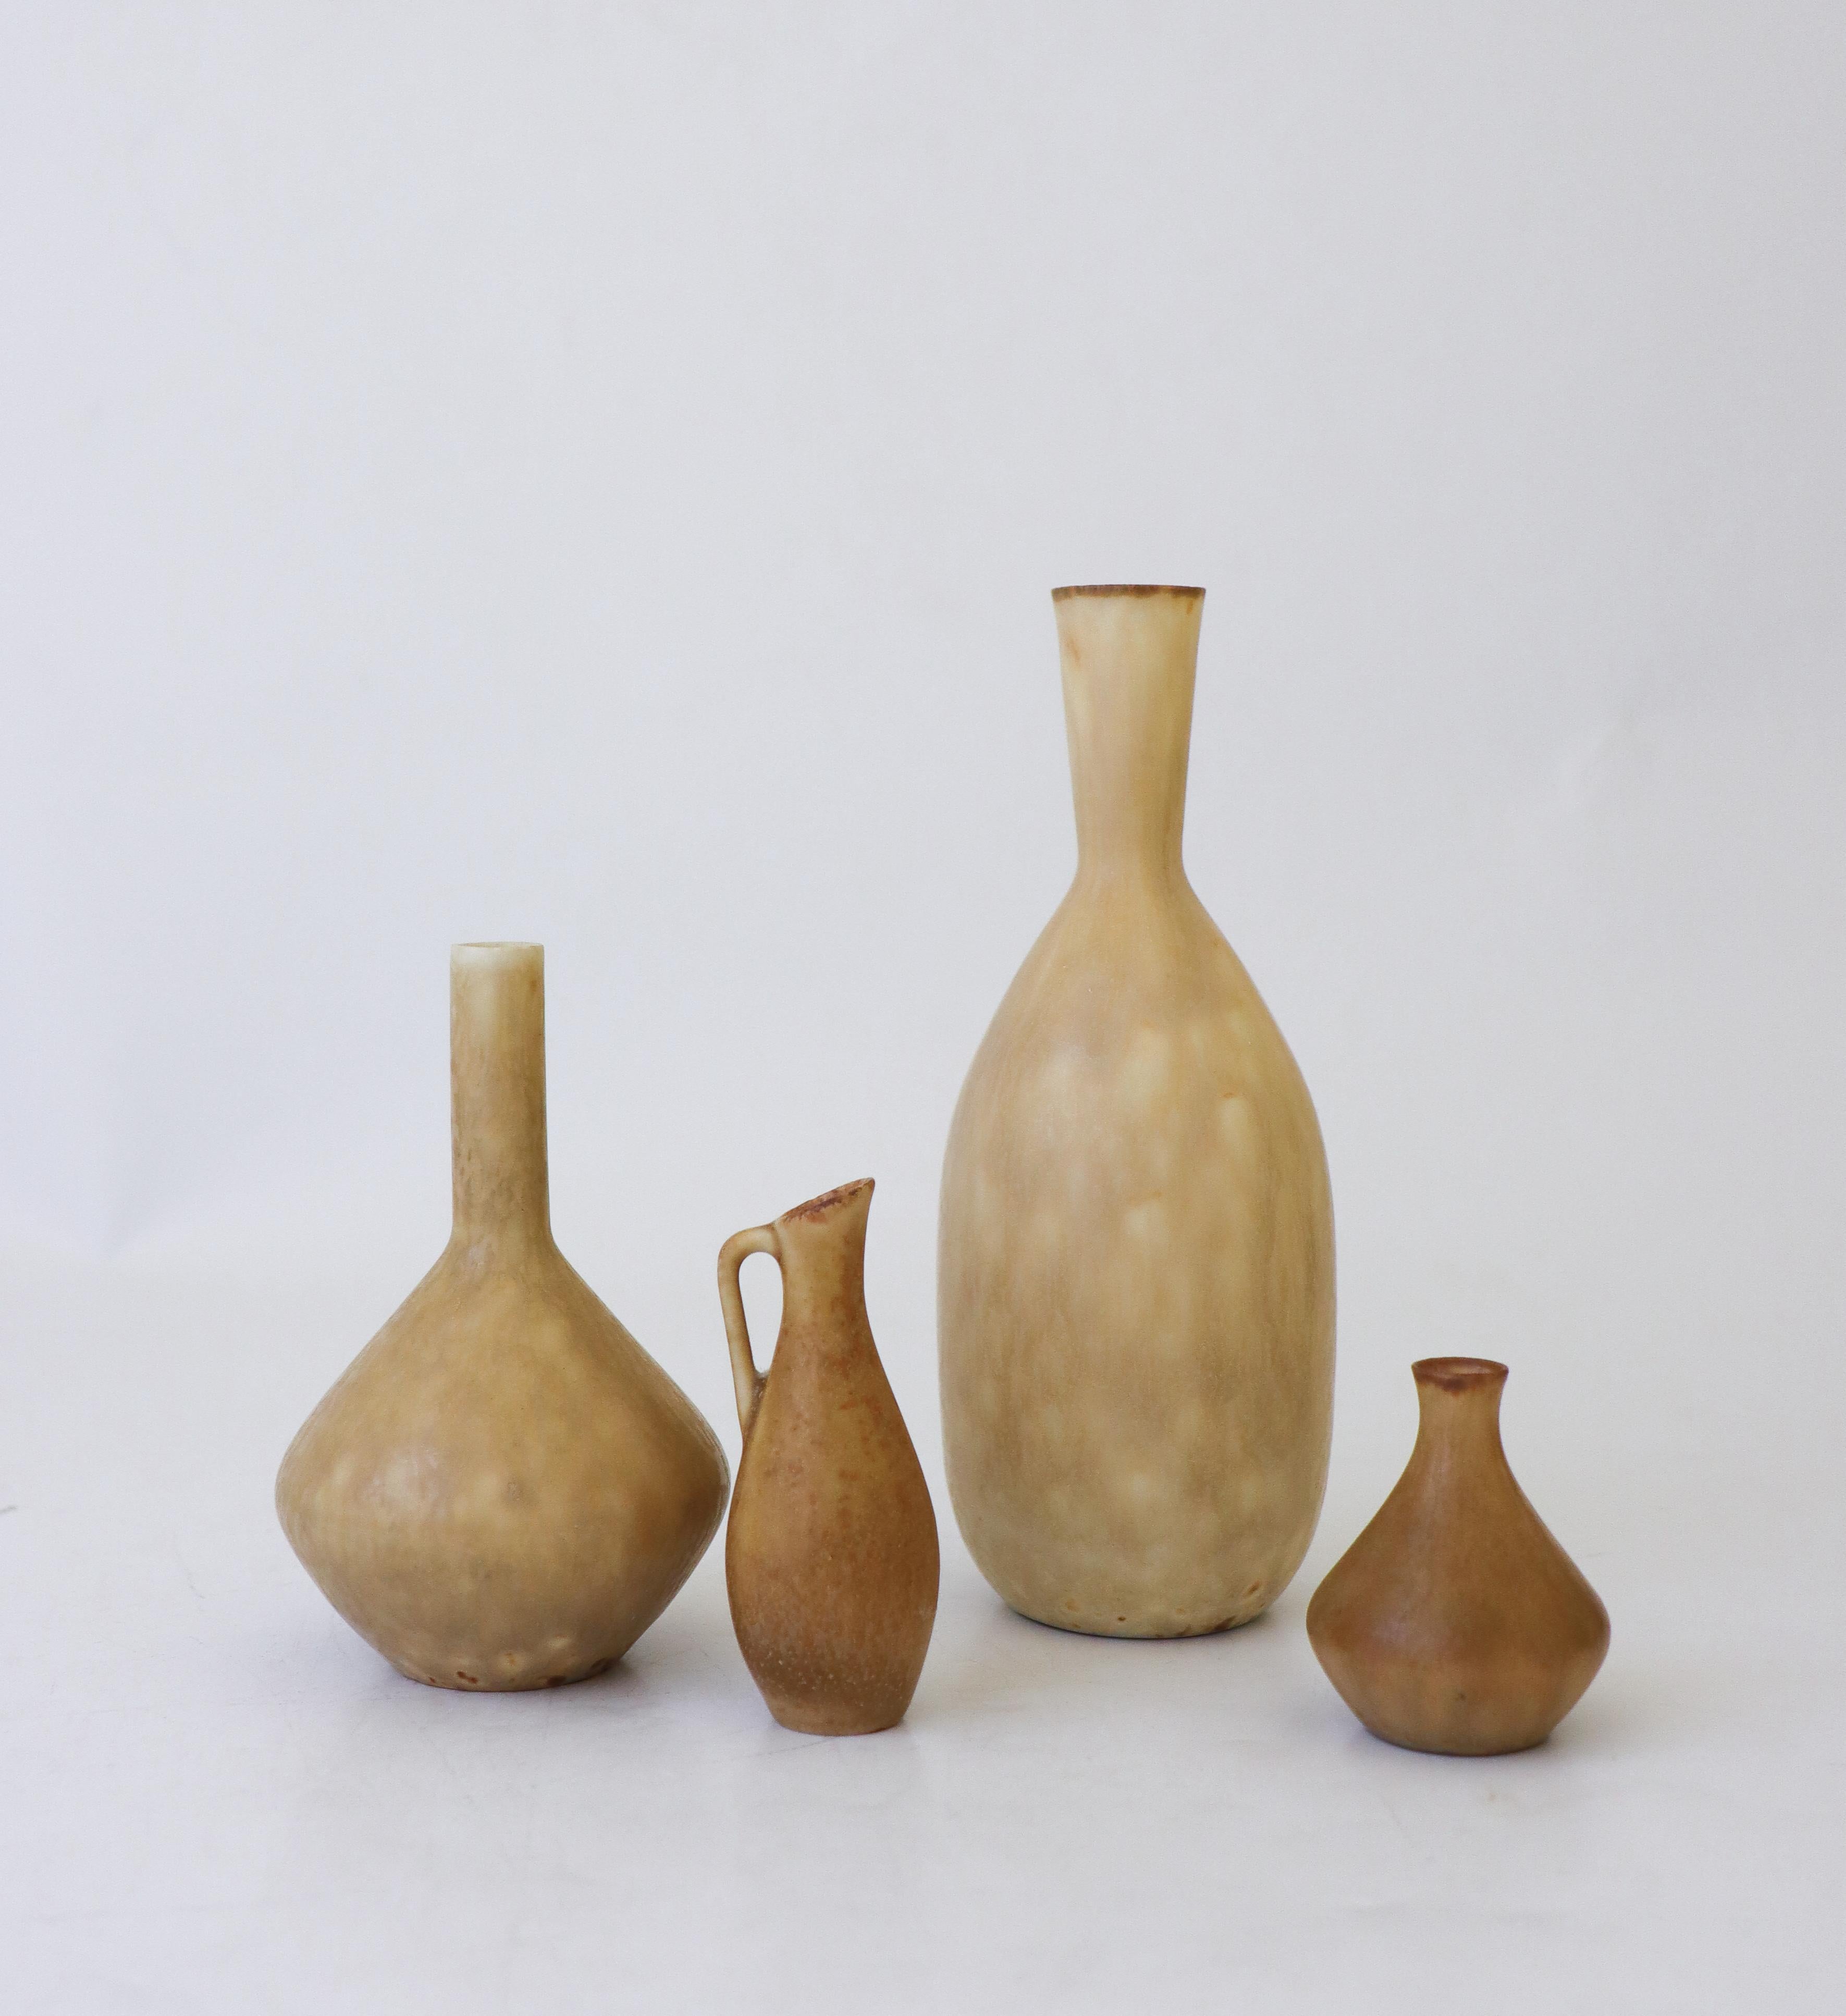 A group of four vases in a yellow/beige glaze designed by Carl-Harry Stålhane at Rörstrand. The vases are 15.5, 10.5, 7.5 and 5 cm high. They are all in excellent condition and first quality. 

Carl-Harry Stålhane is one of the top names when it